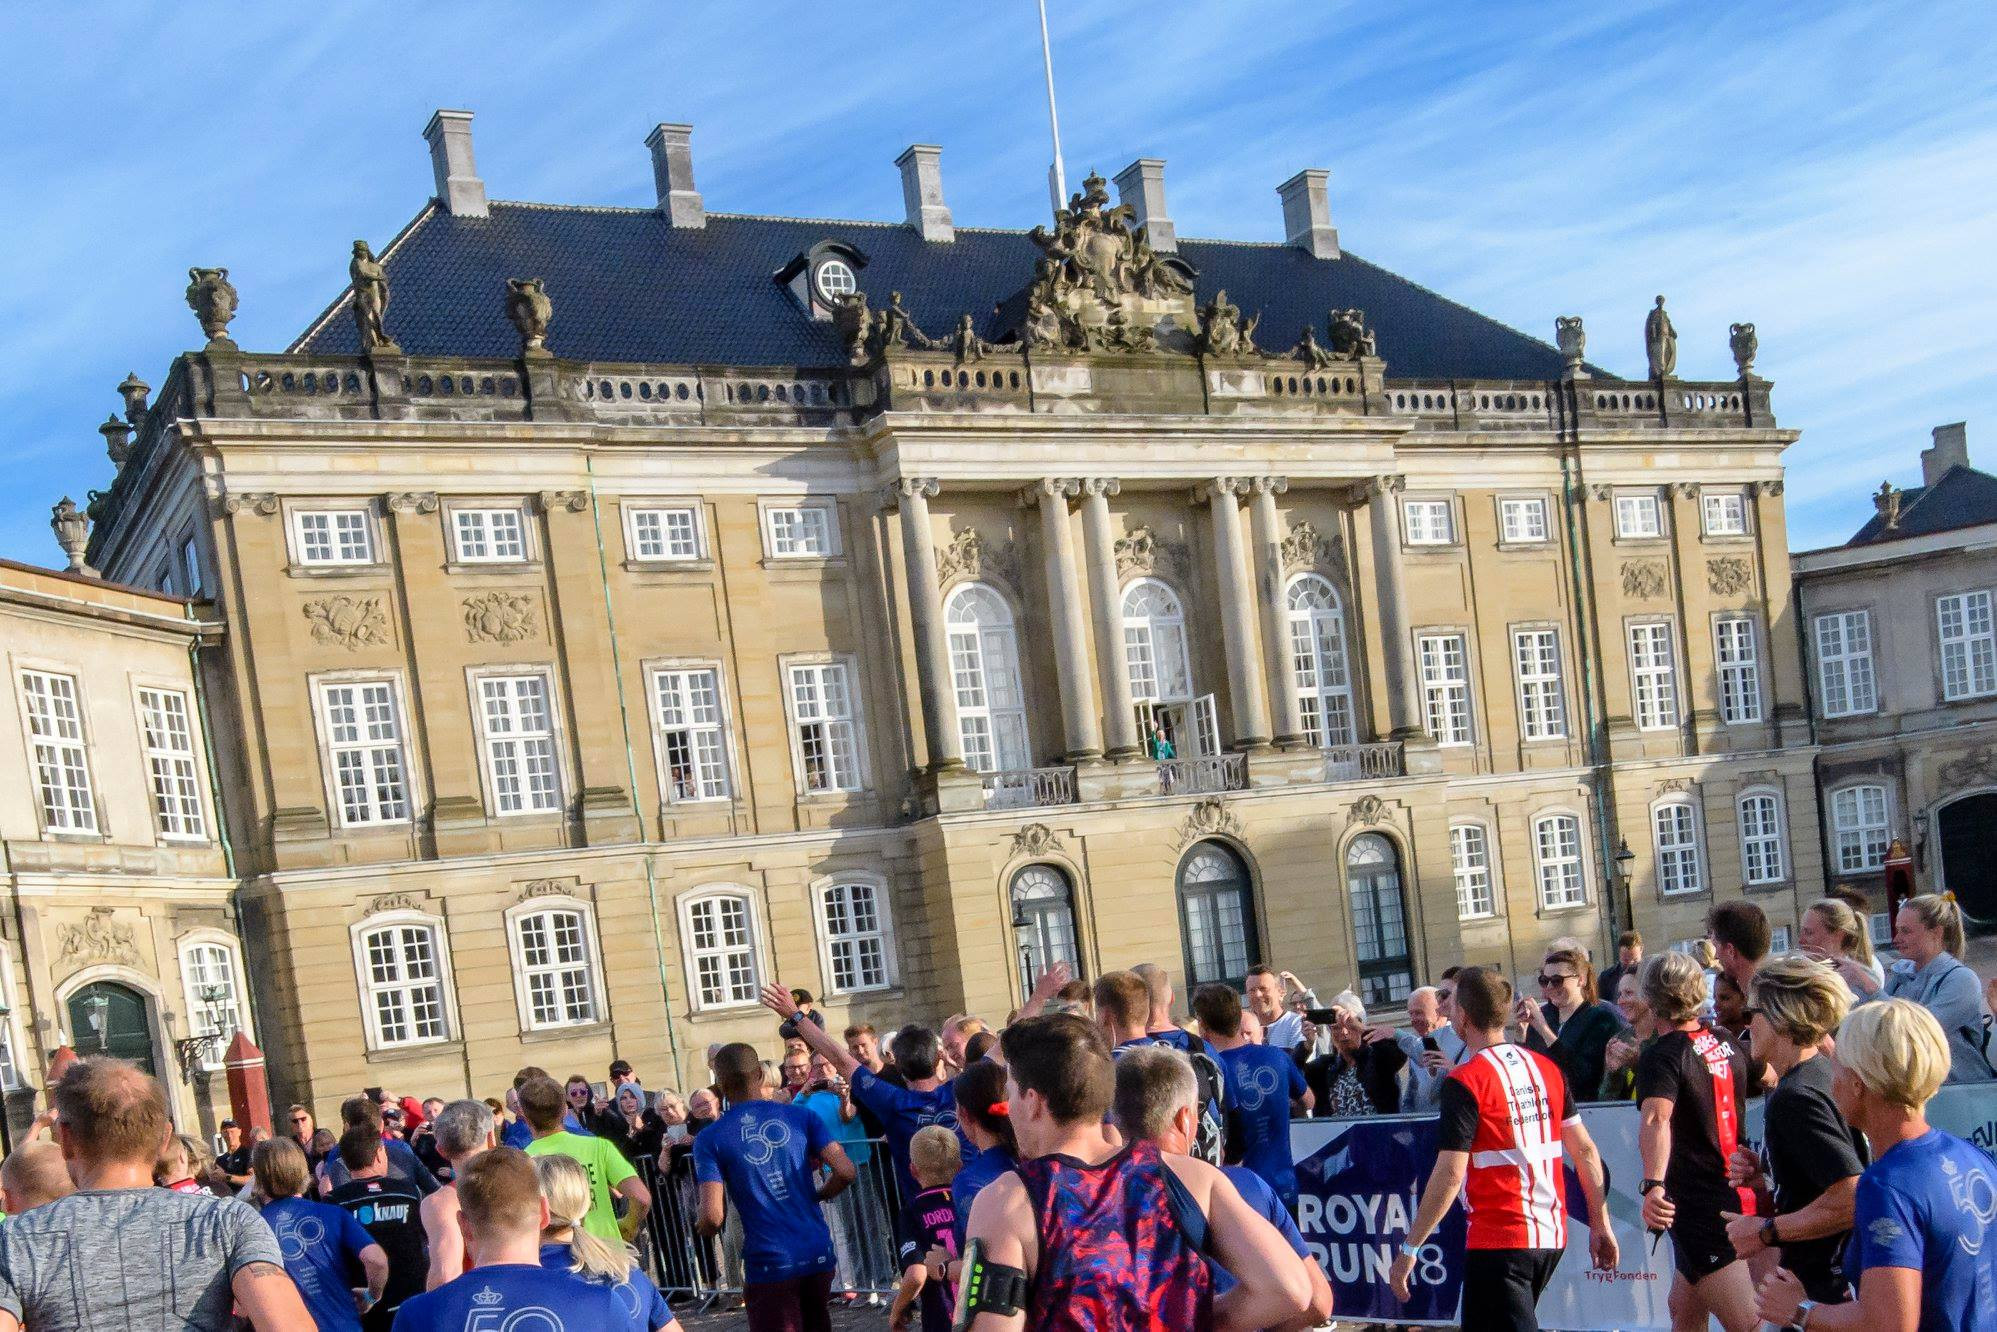 Tens of thousands of people took part in the event ©Royal Run